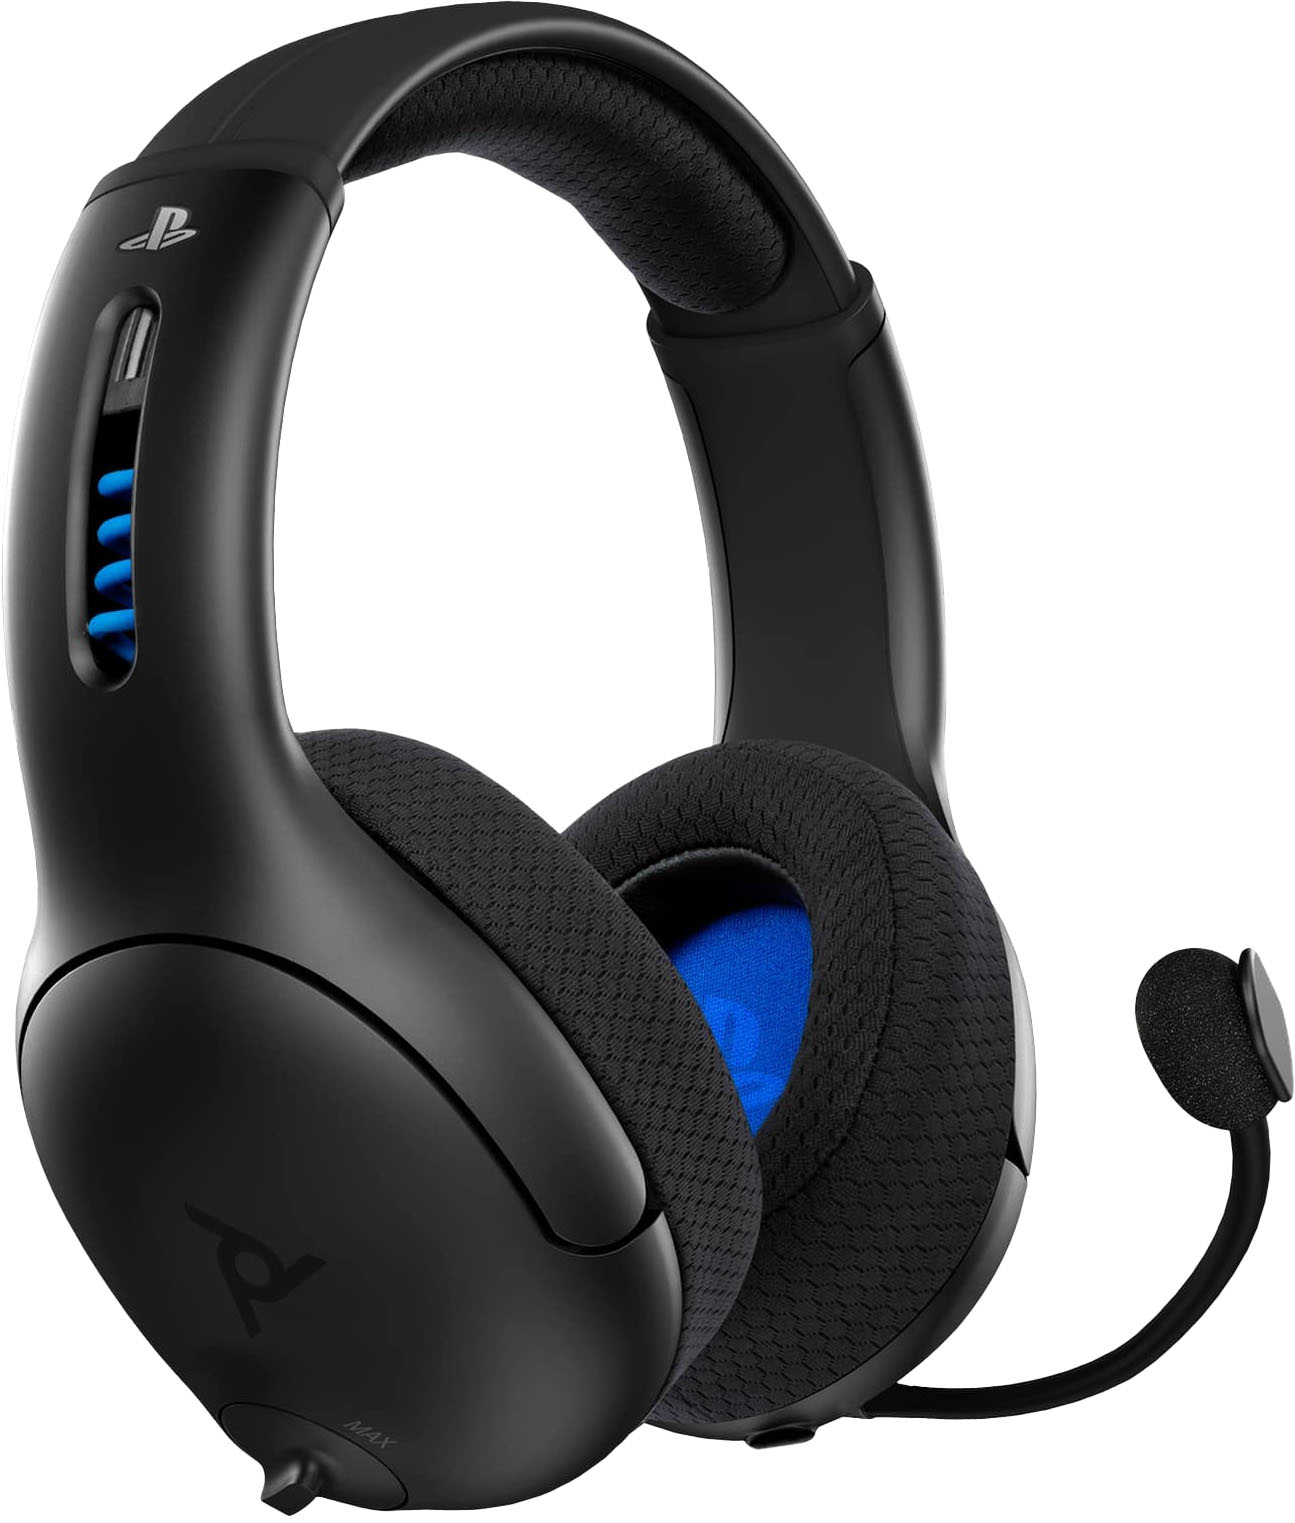 playstation headphones with mic